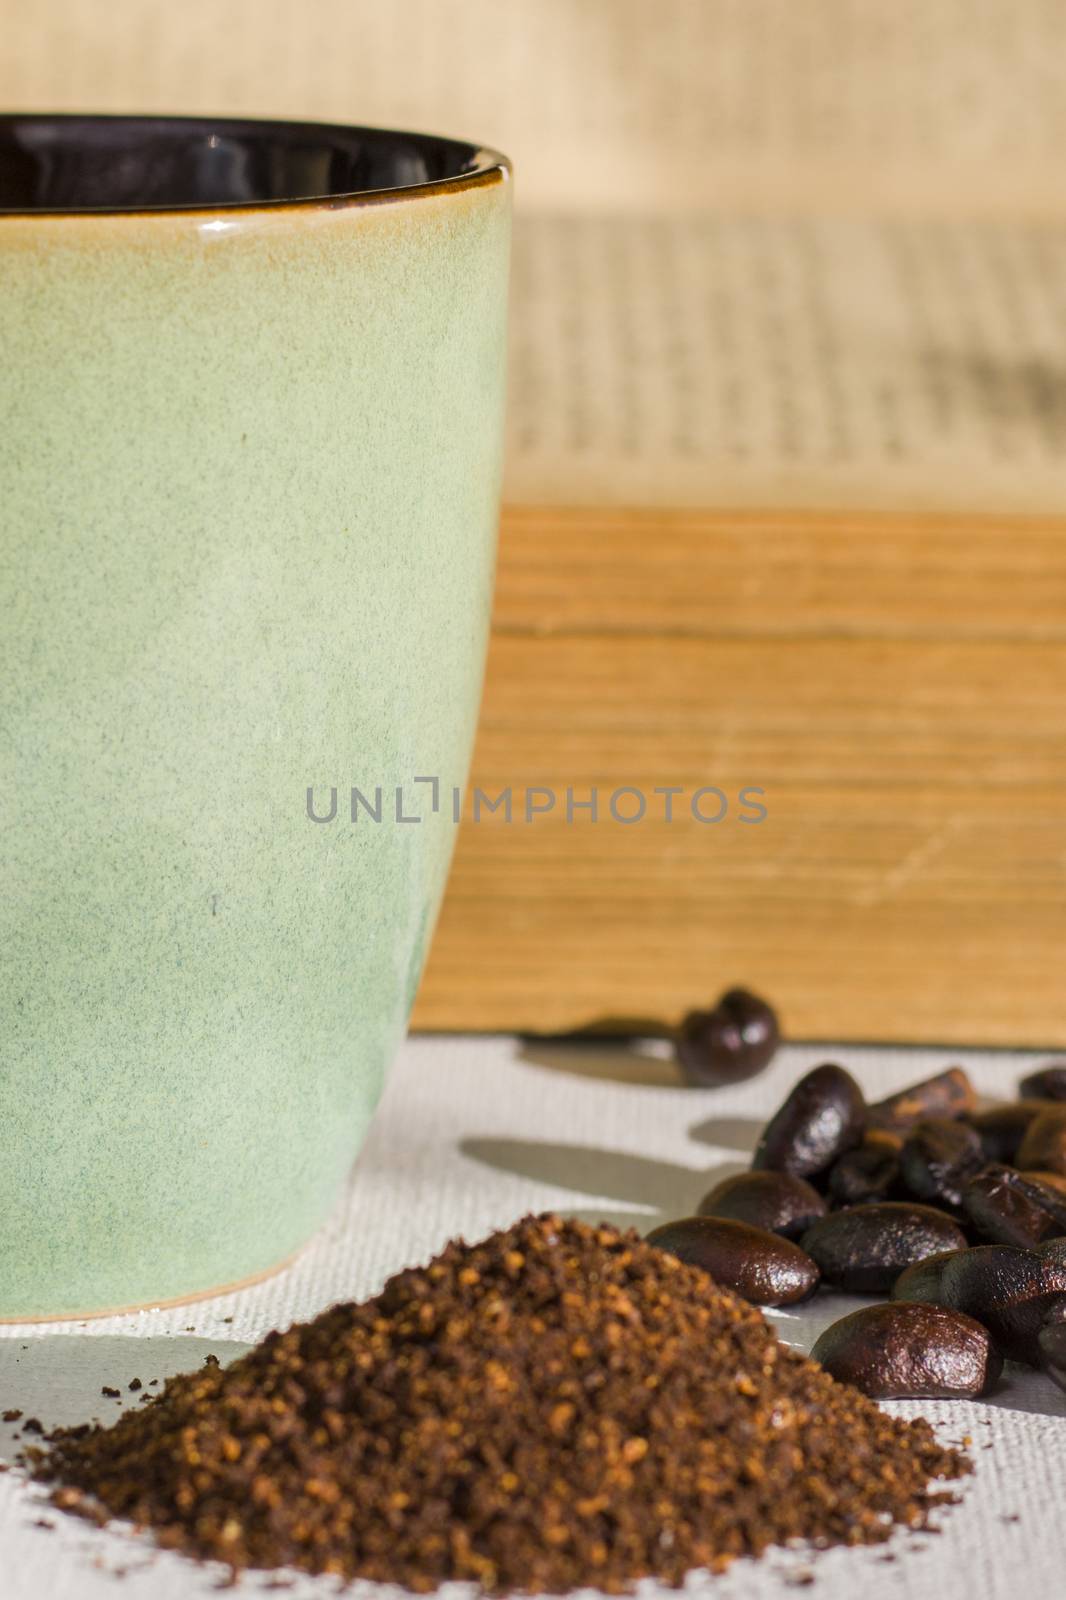 Roasted coffee beans and grained coffee seeds, studio shot, book and cup